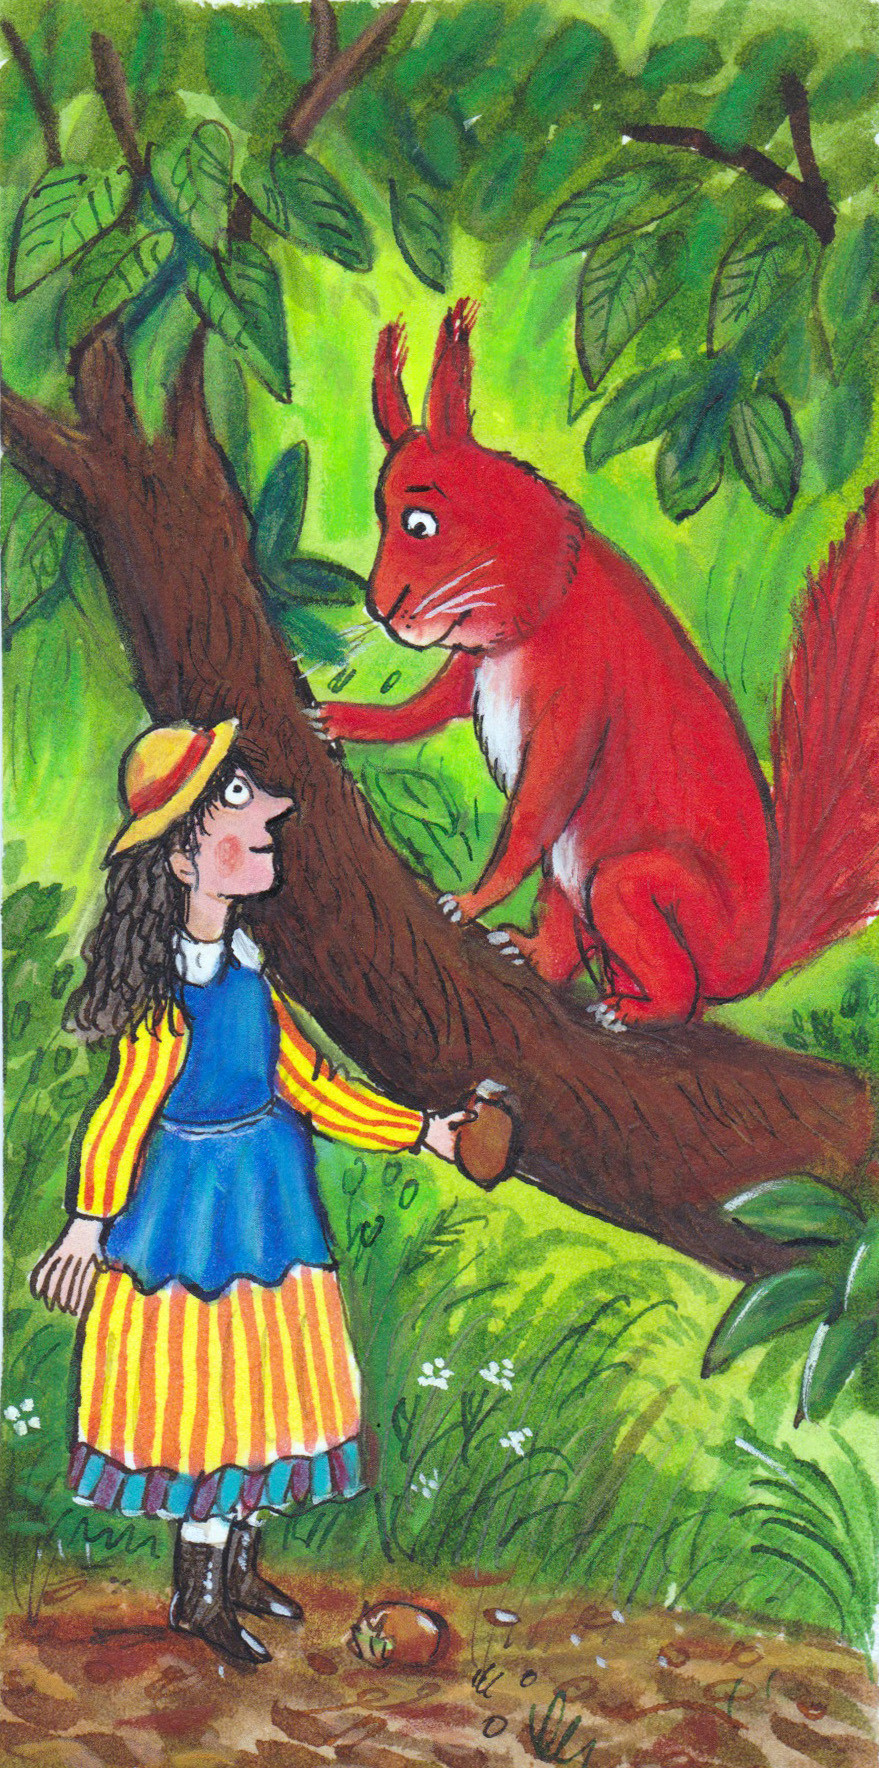 Girl and squirrel illustration